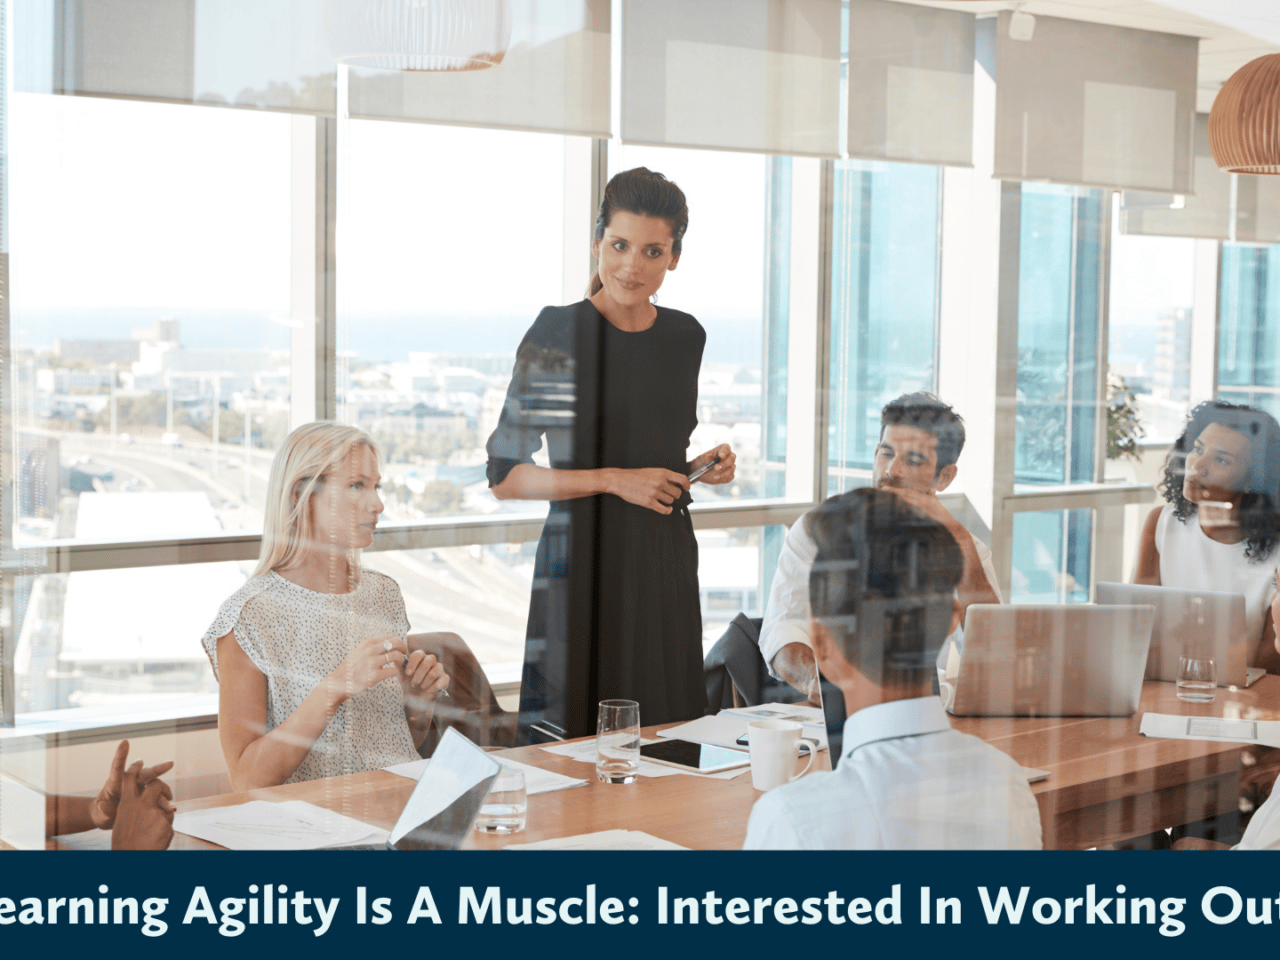 Learning Agility is a muscle: Interested in working out?